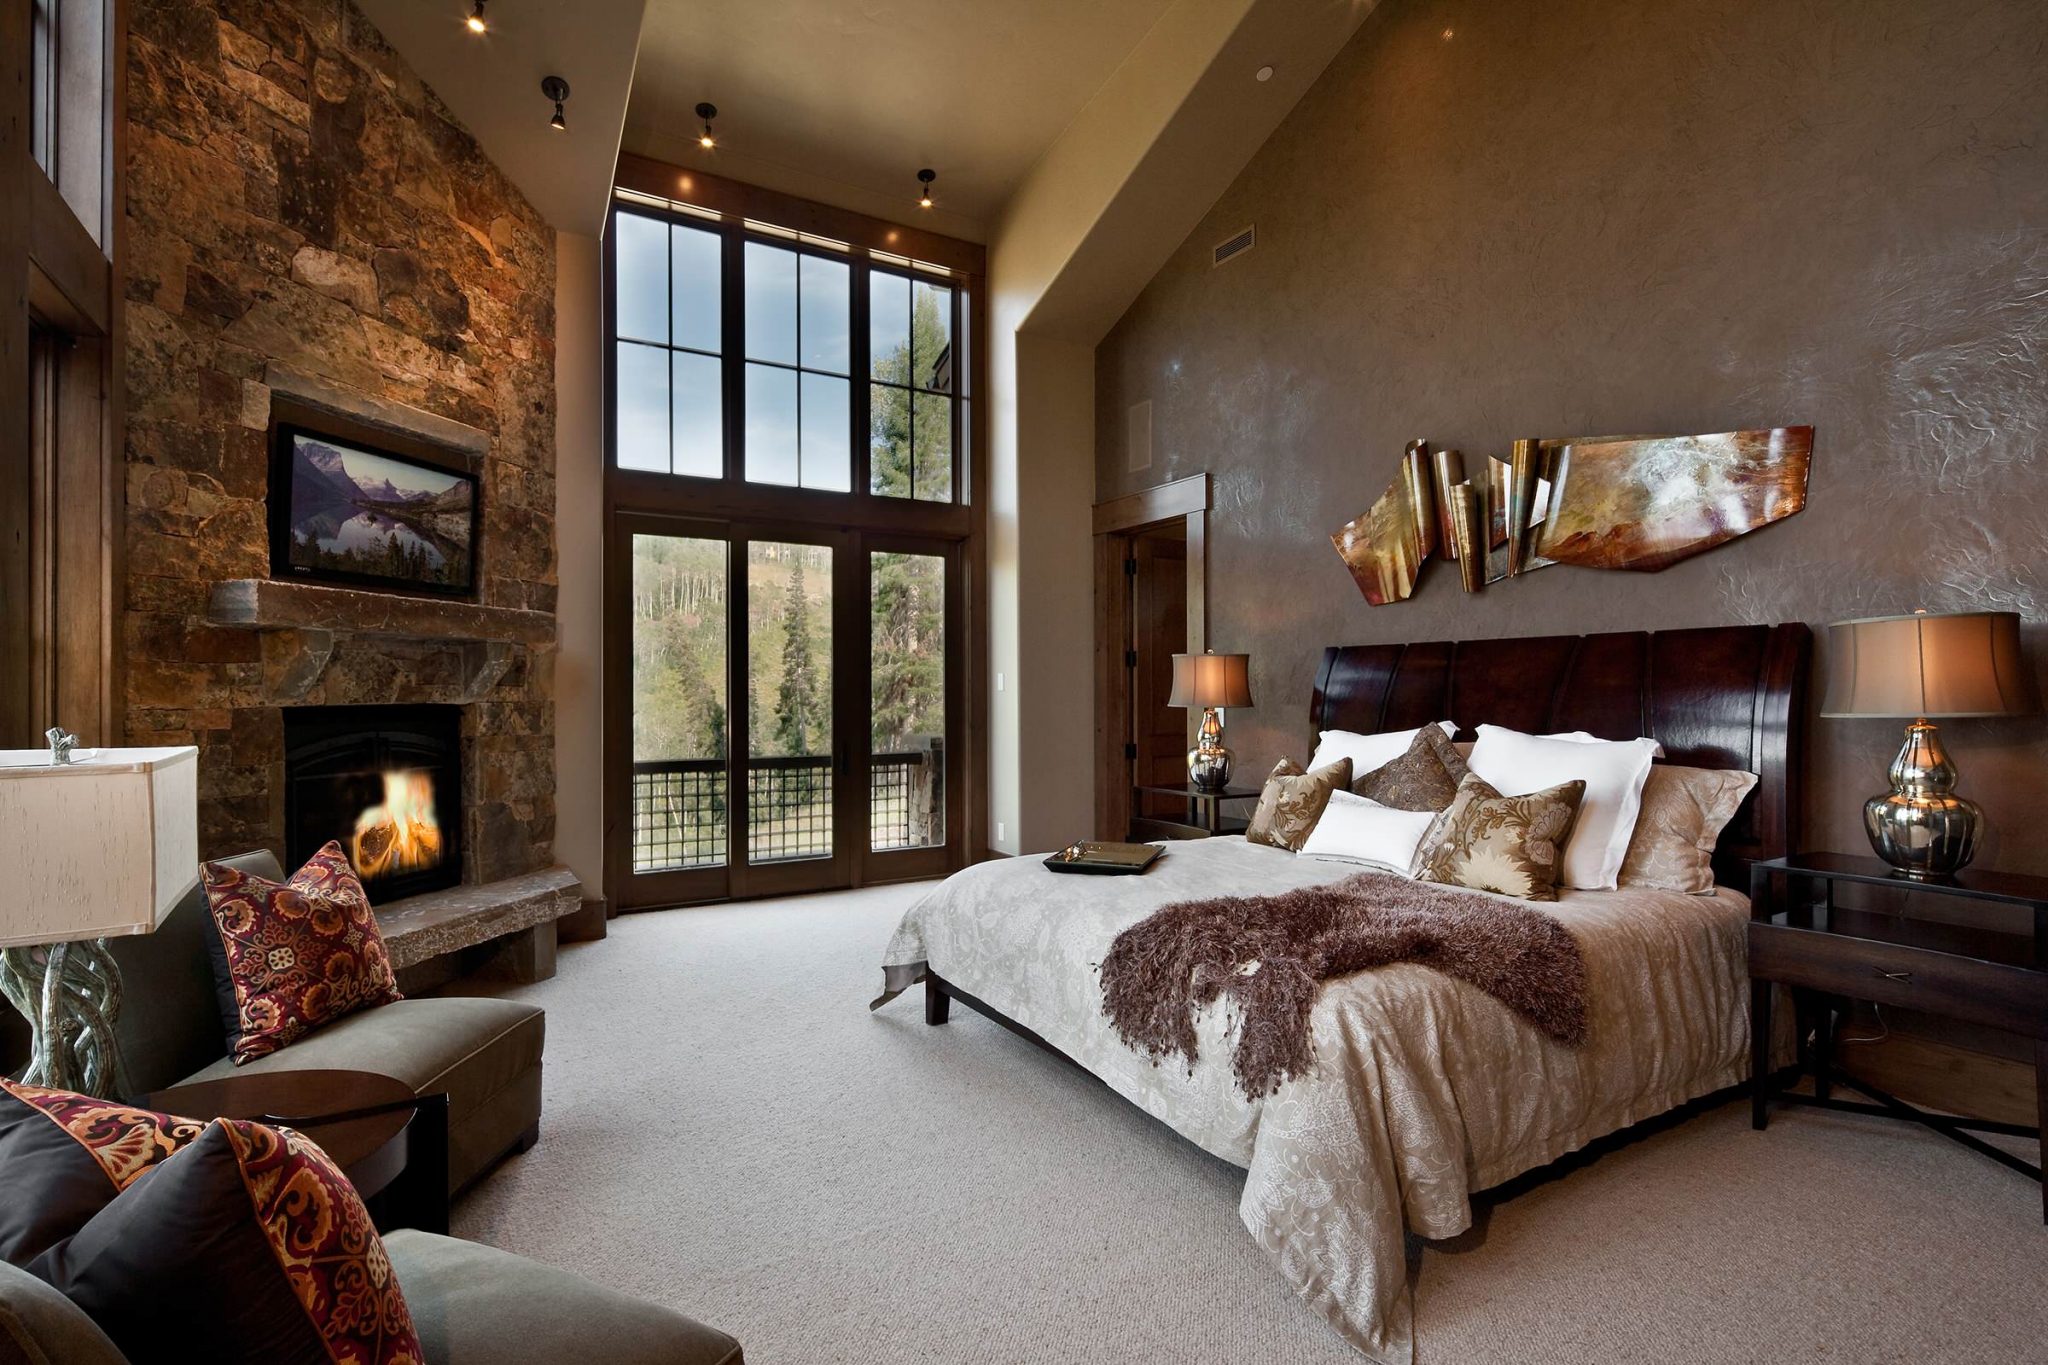 Rustic Bedrooms: Drift Into Dreamland With Cozy Decor Choices